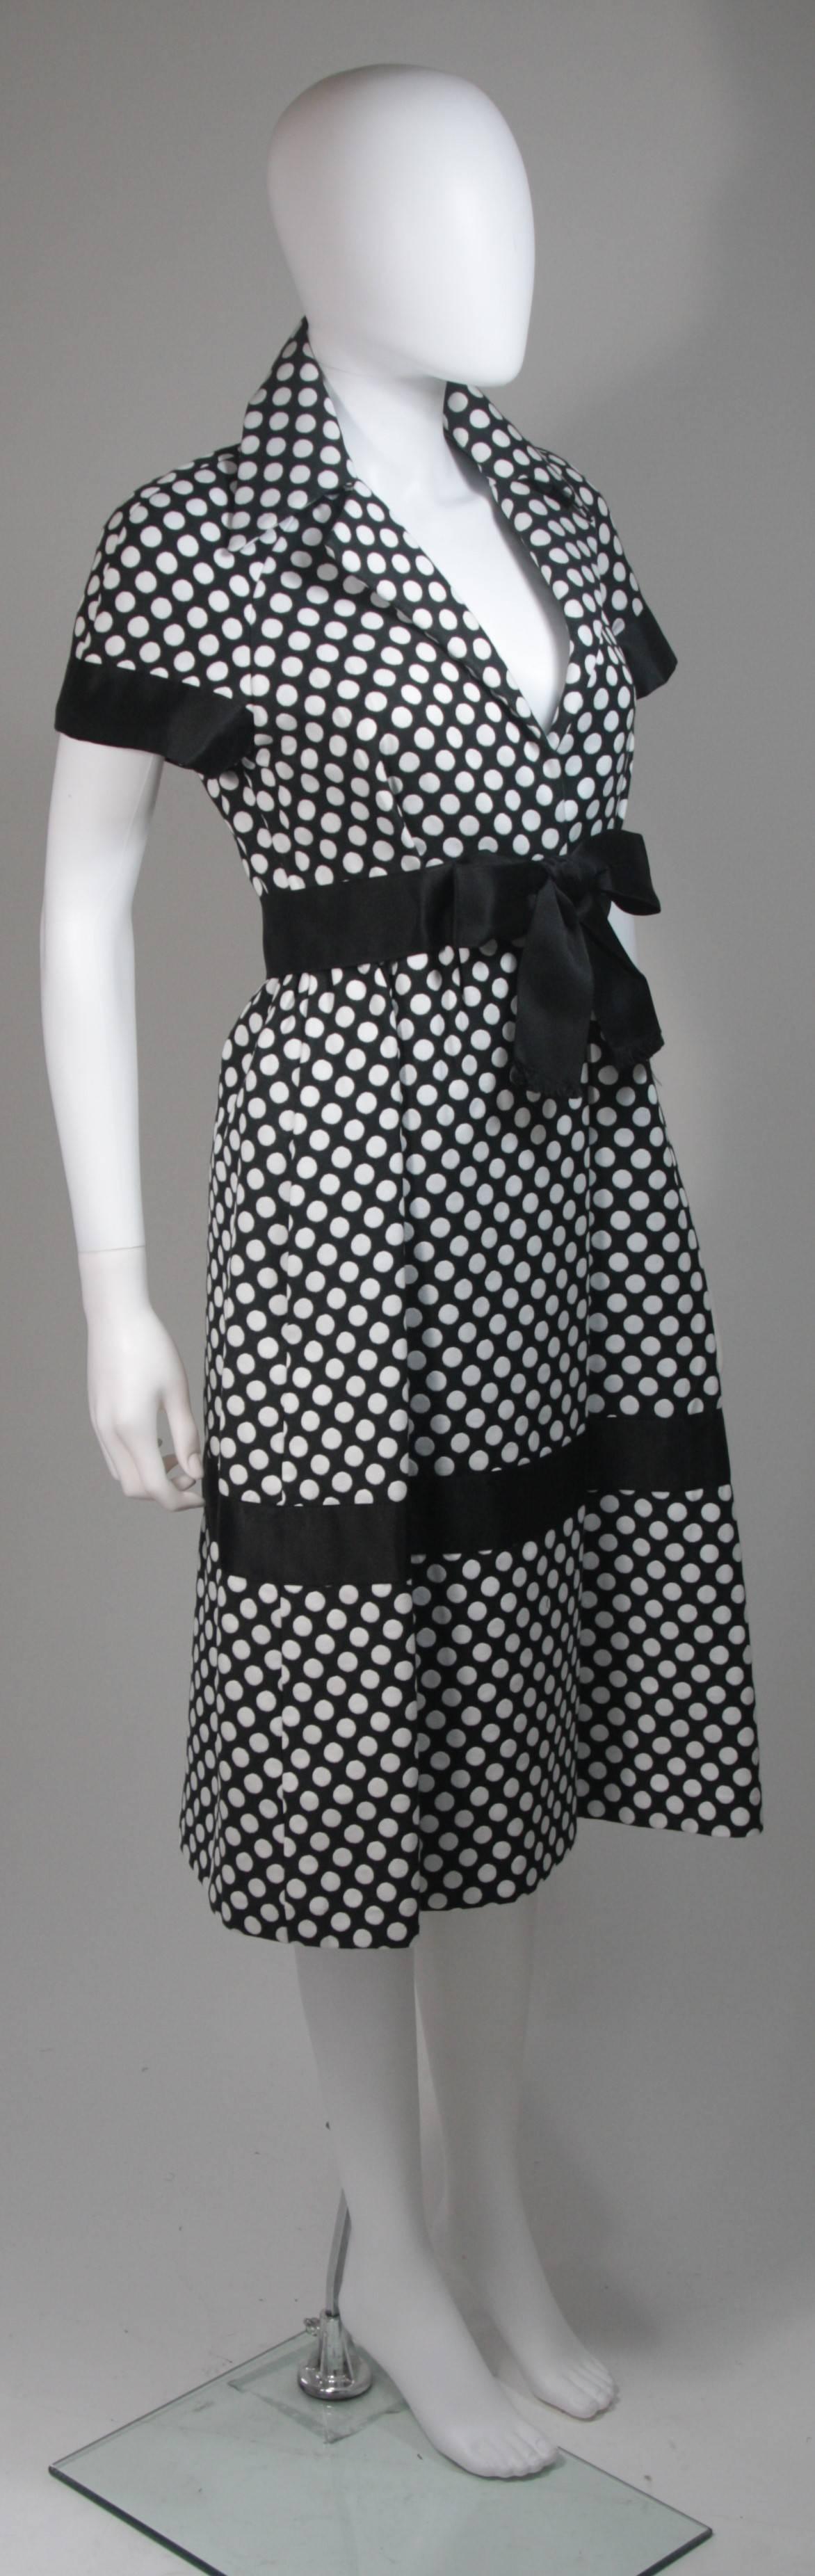 Geoffrey Beene Black and White Polka Dot Dress with Satin Trim Size Small 2